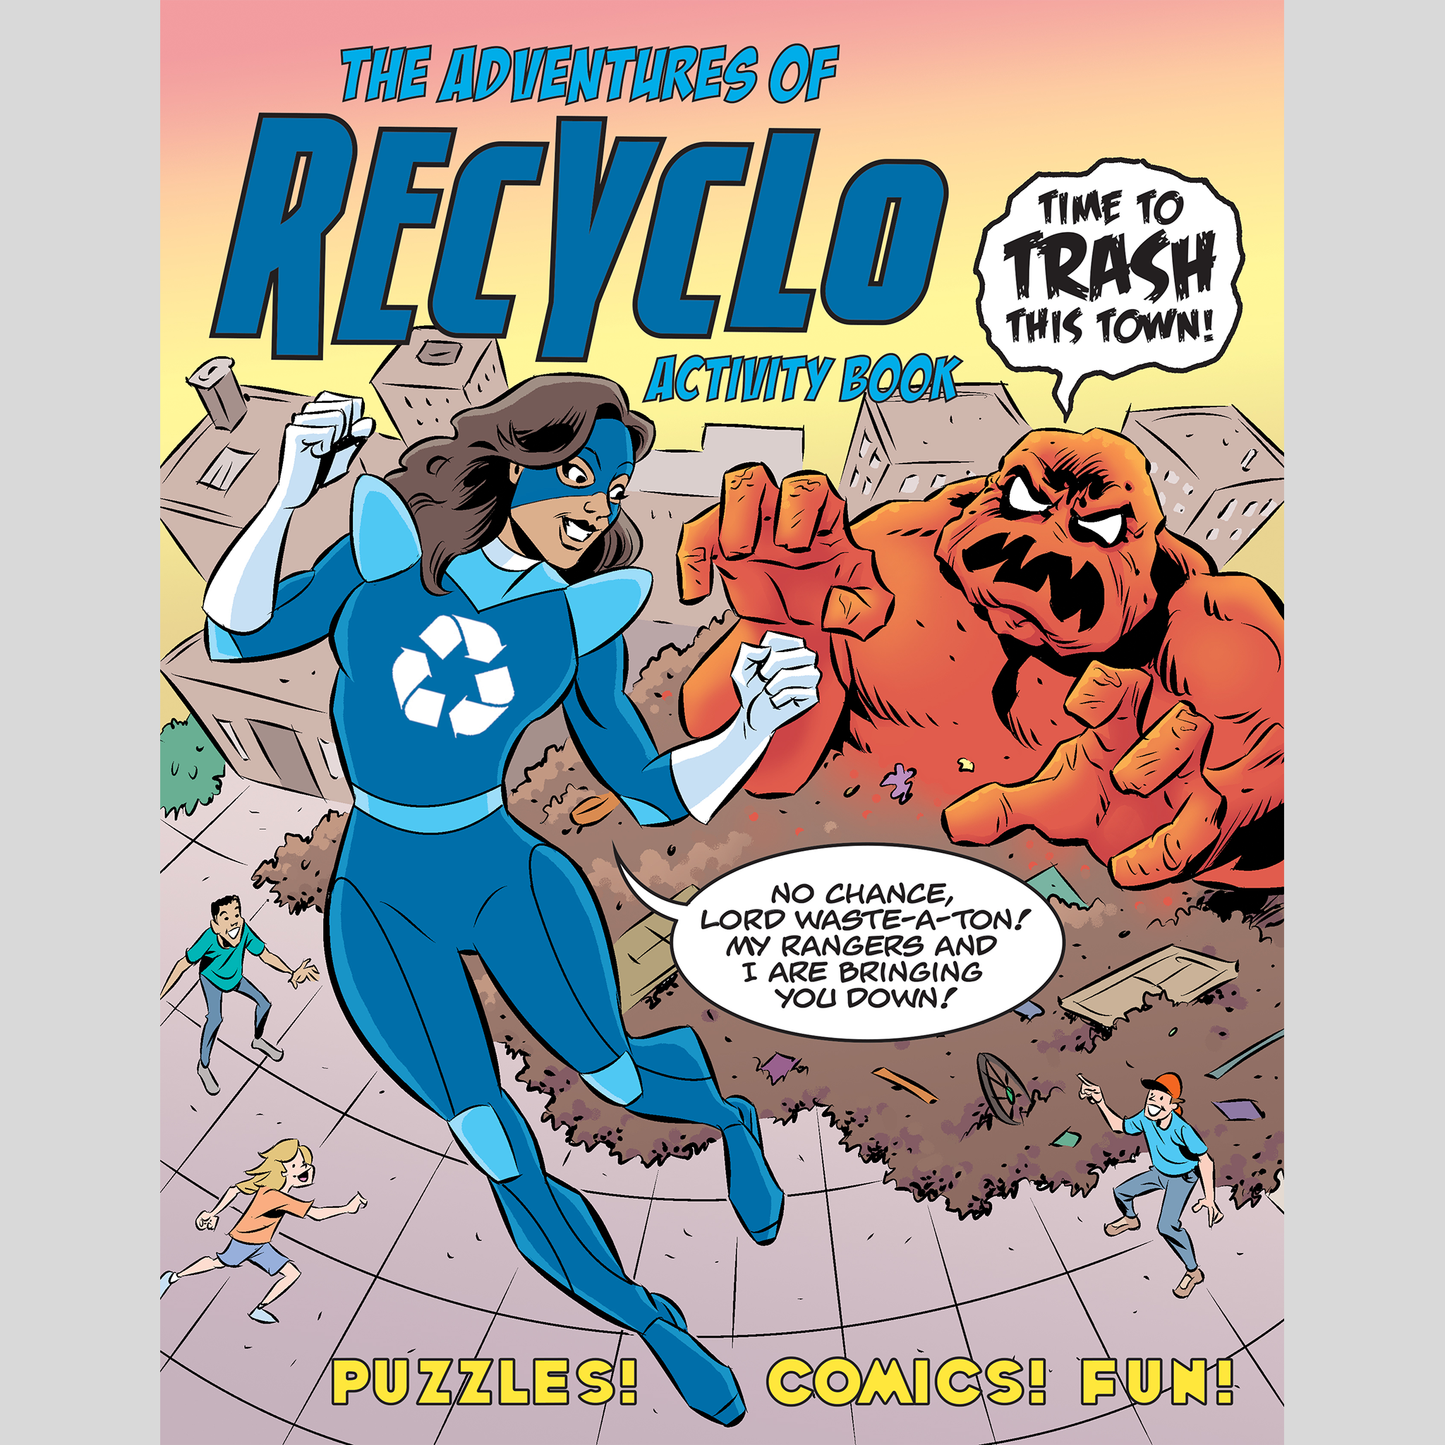 Recycling activity book for residents